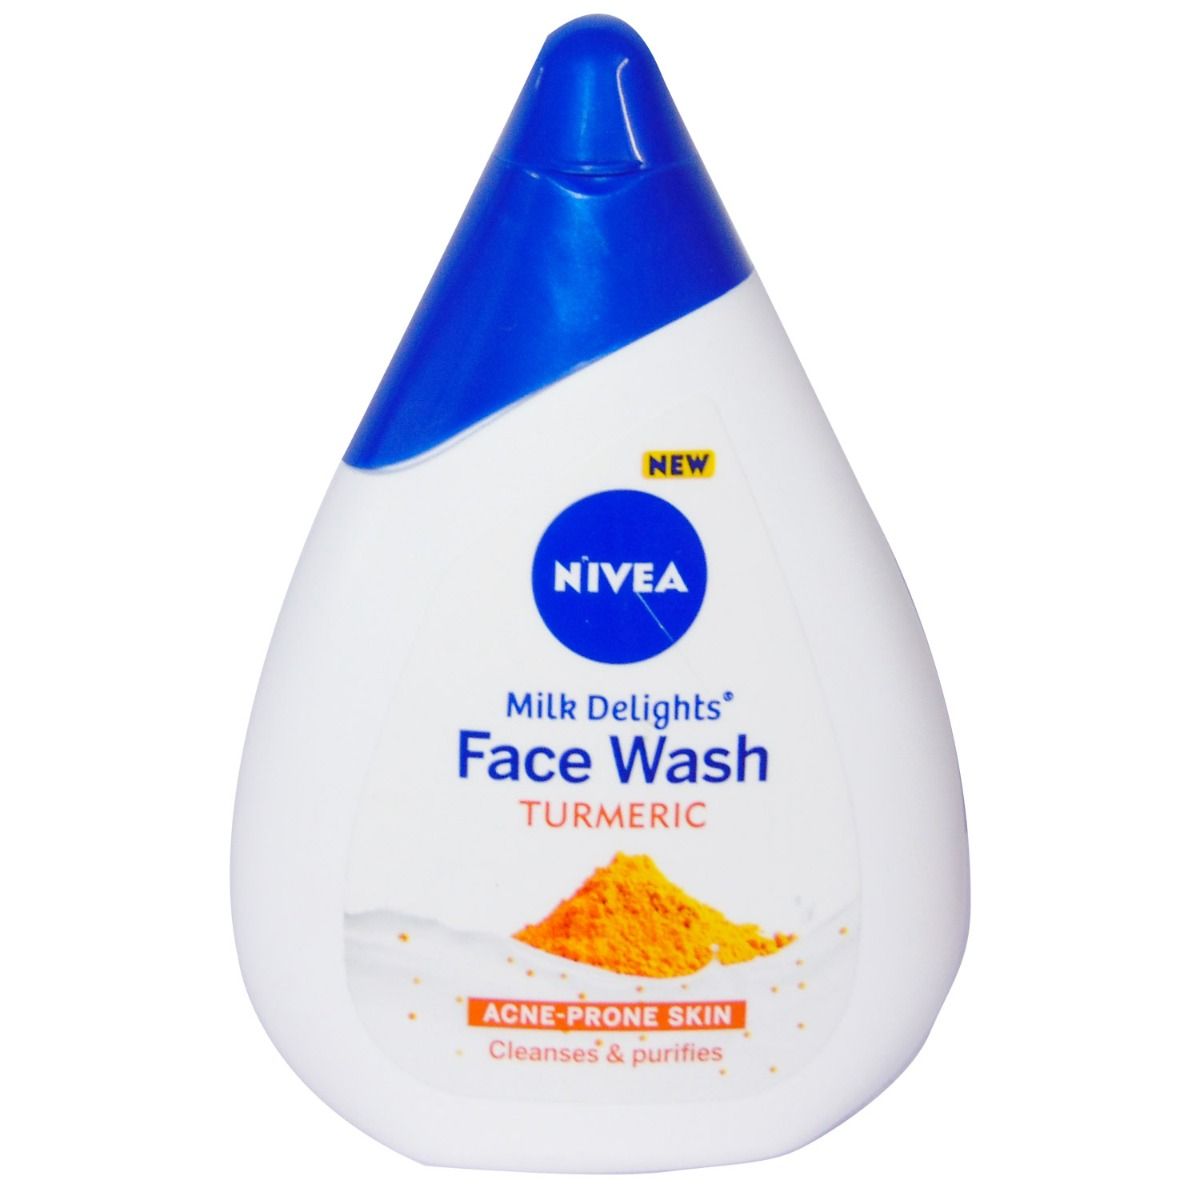 Nivea Milk Delights Cleanses & Purifies Turmeric Face Wash, 50 ml, Pack of 1 